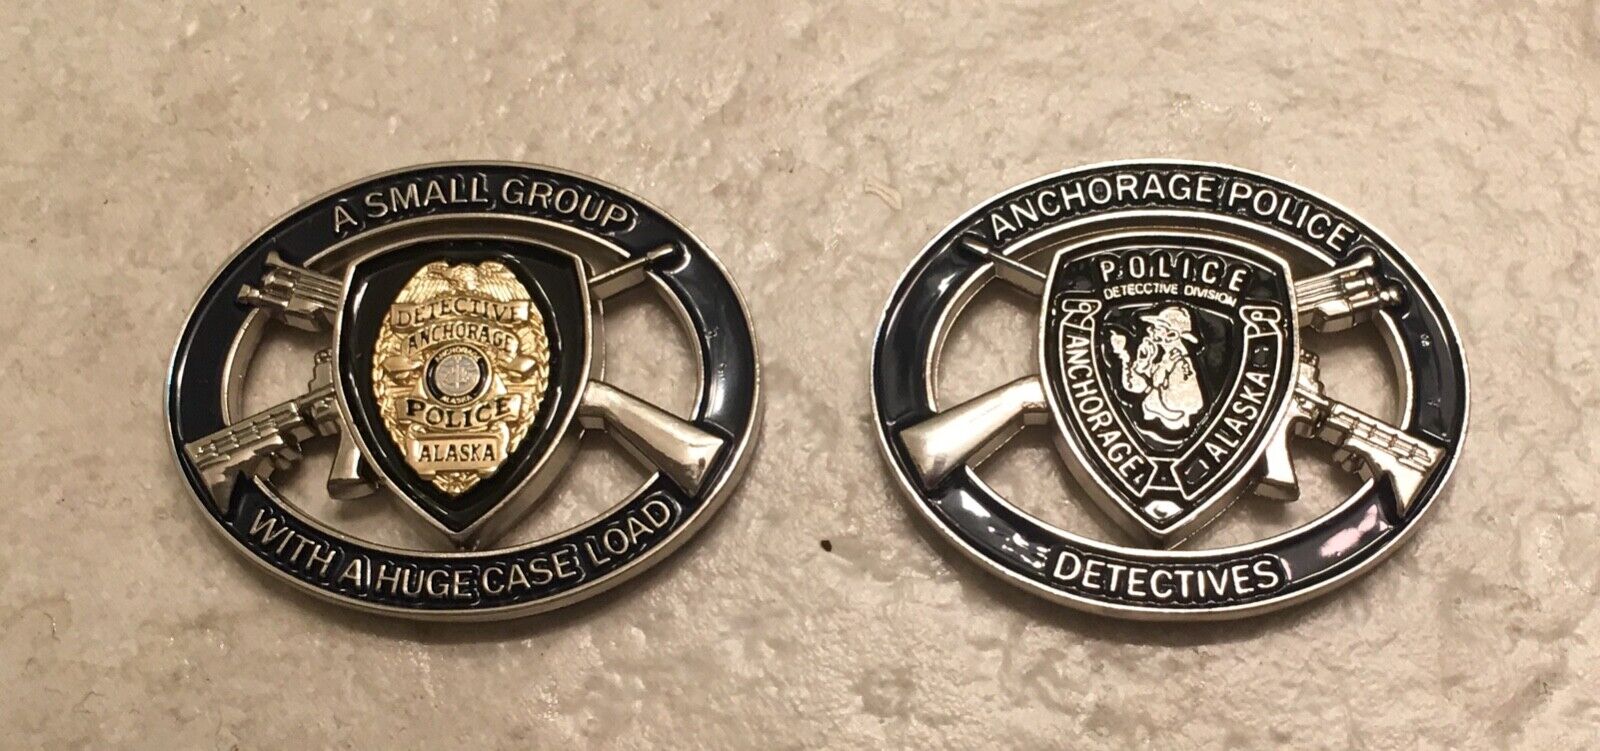 Anchorage Police Department Detective Oval  Police Challenge coin 